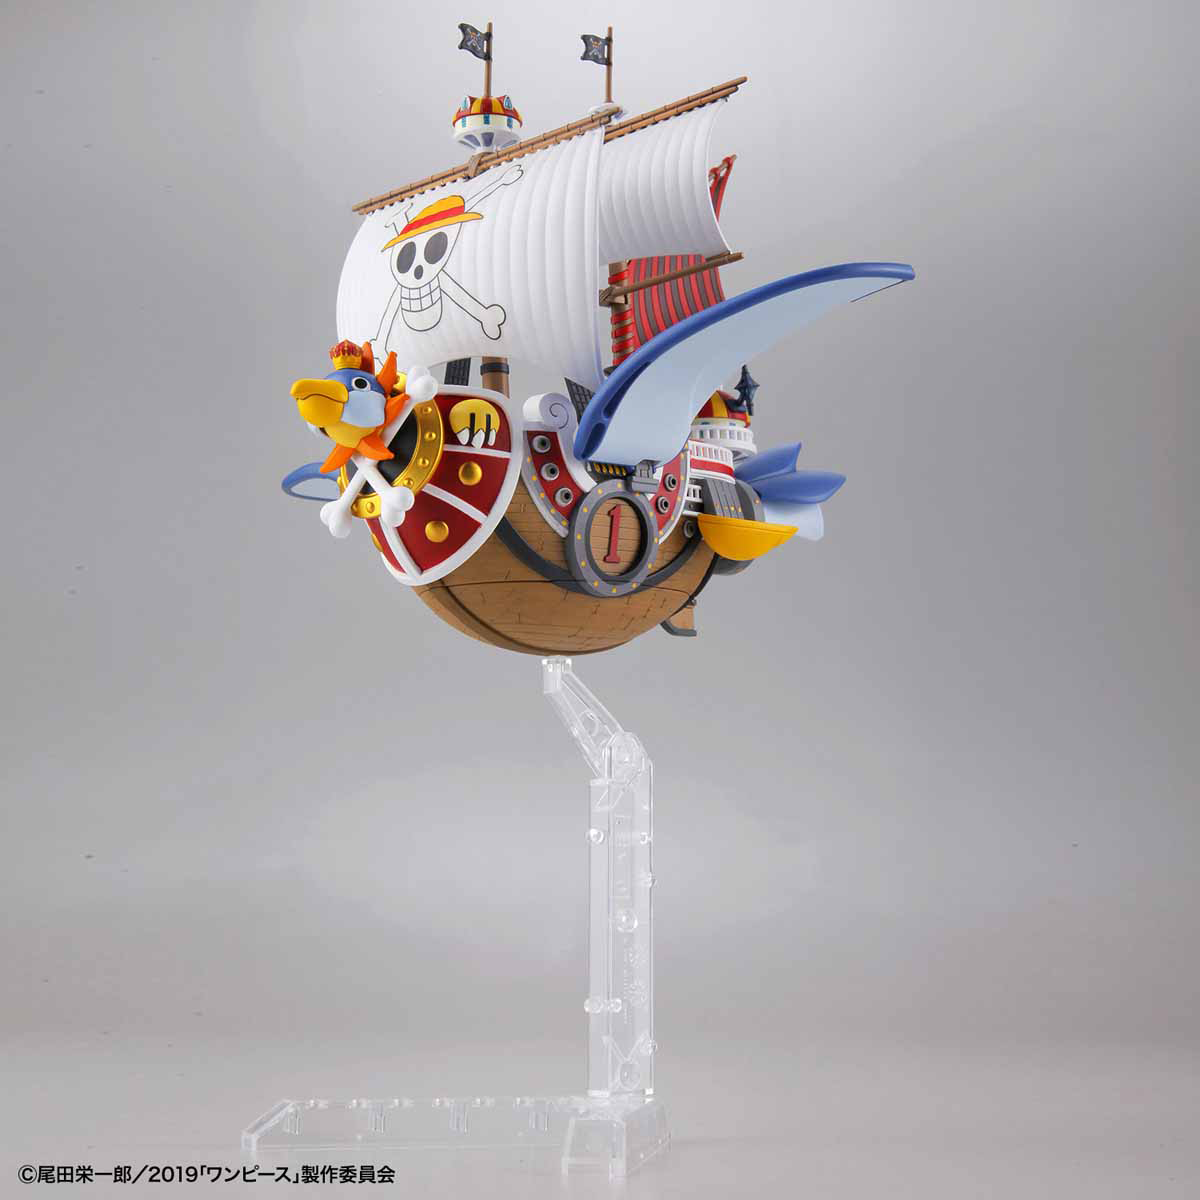 ONE PIECE - GRAND SHIP COLLECTION THOUSAND -SUNNY FLYING MODEL (REPEAT) **PRE-ORDER**